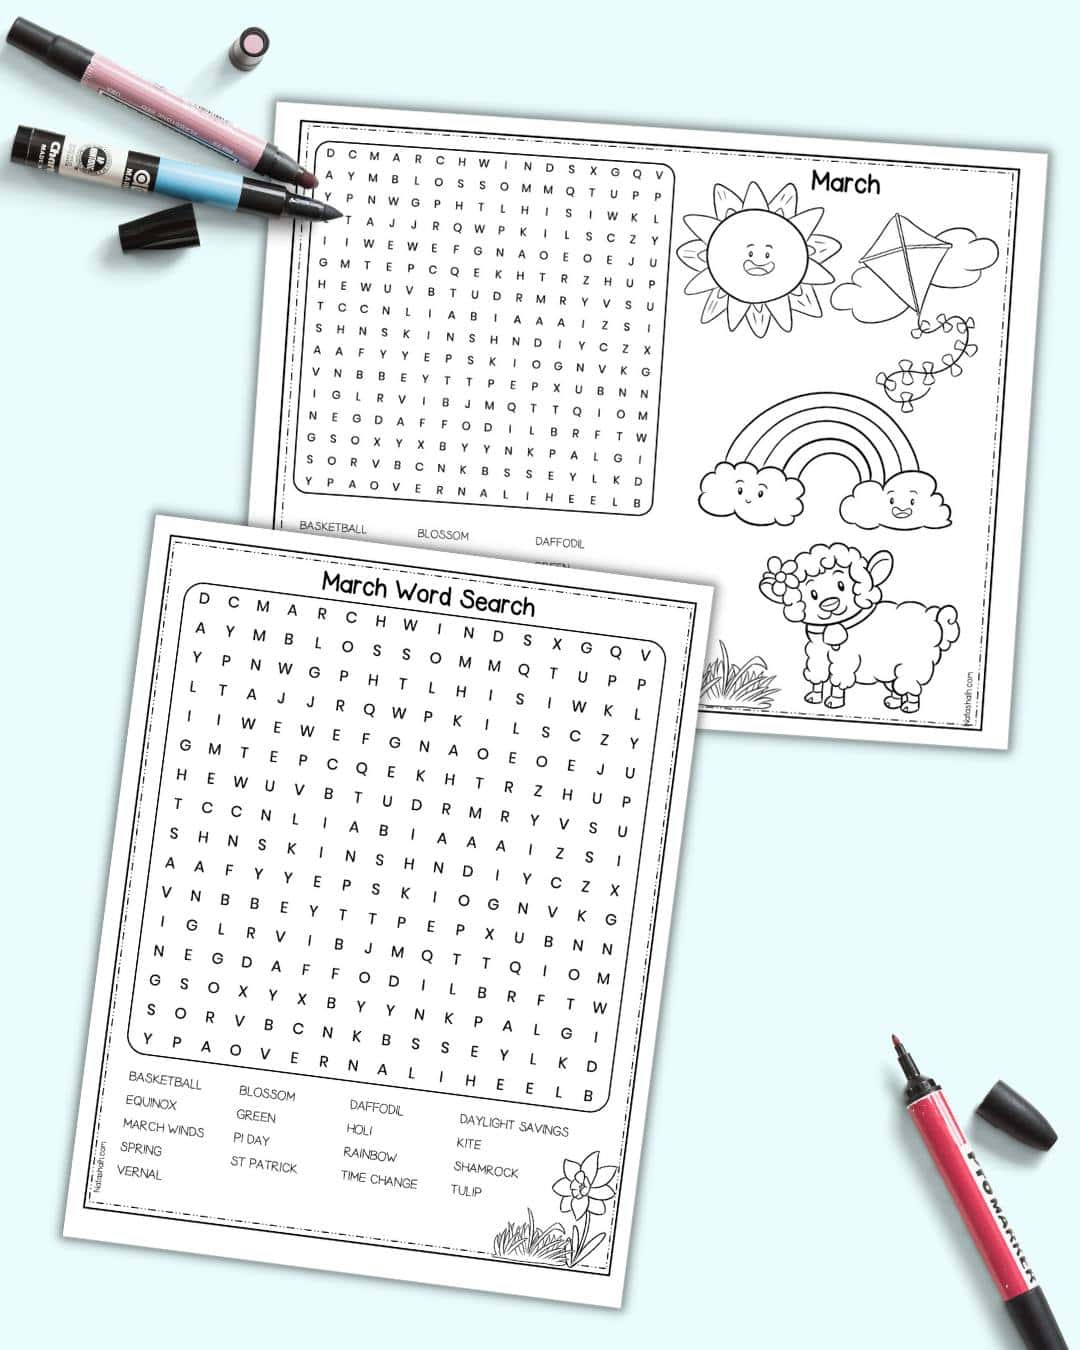 A review of two pages of March word search puzzle. One is in portrait orientation and the other in landscape.